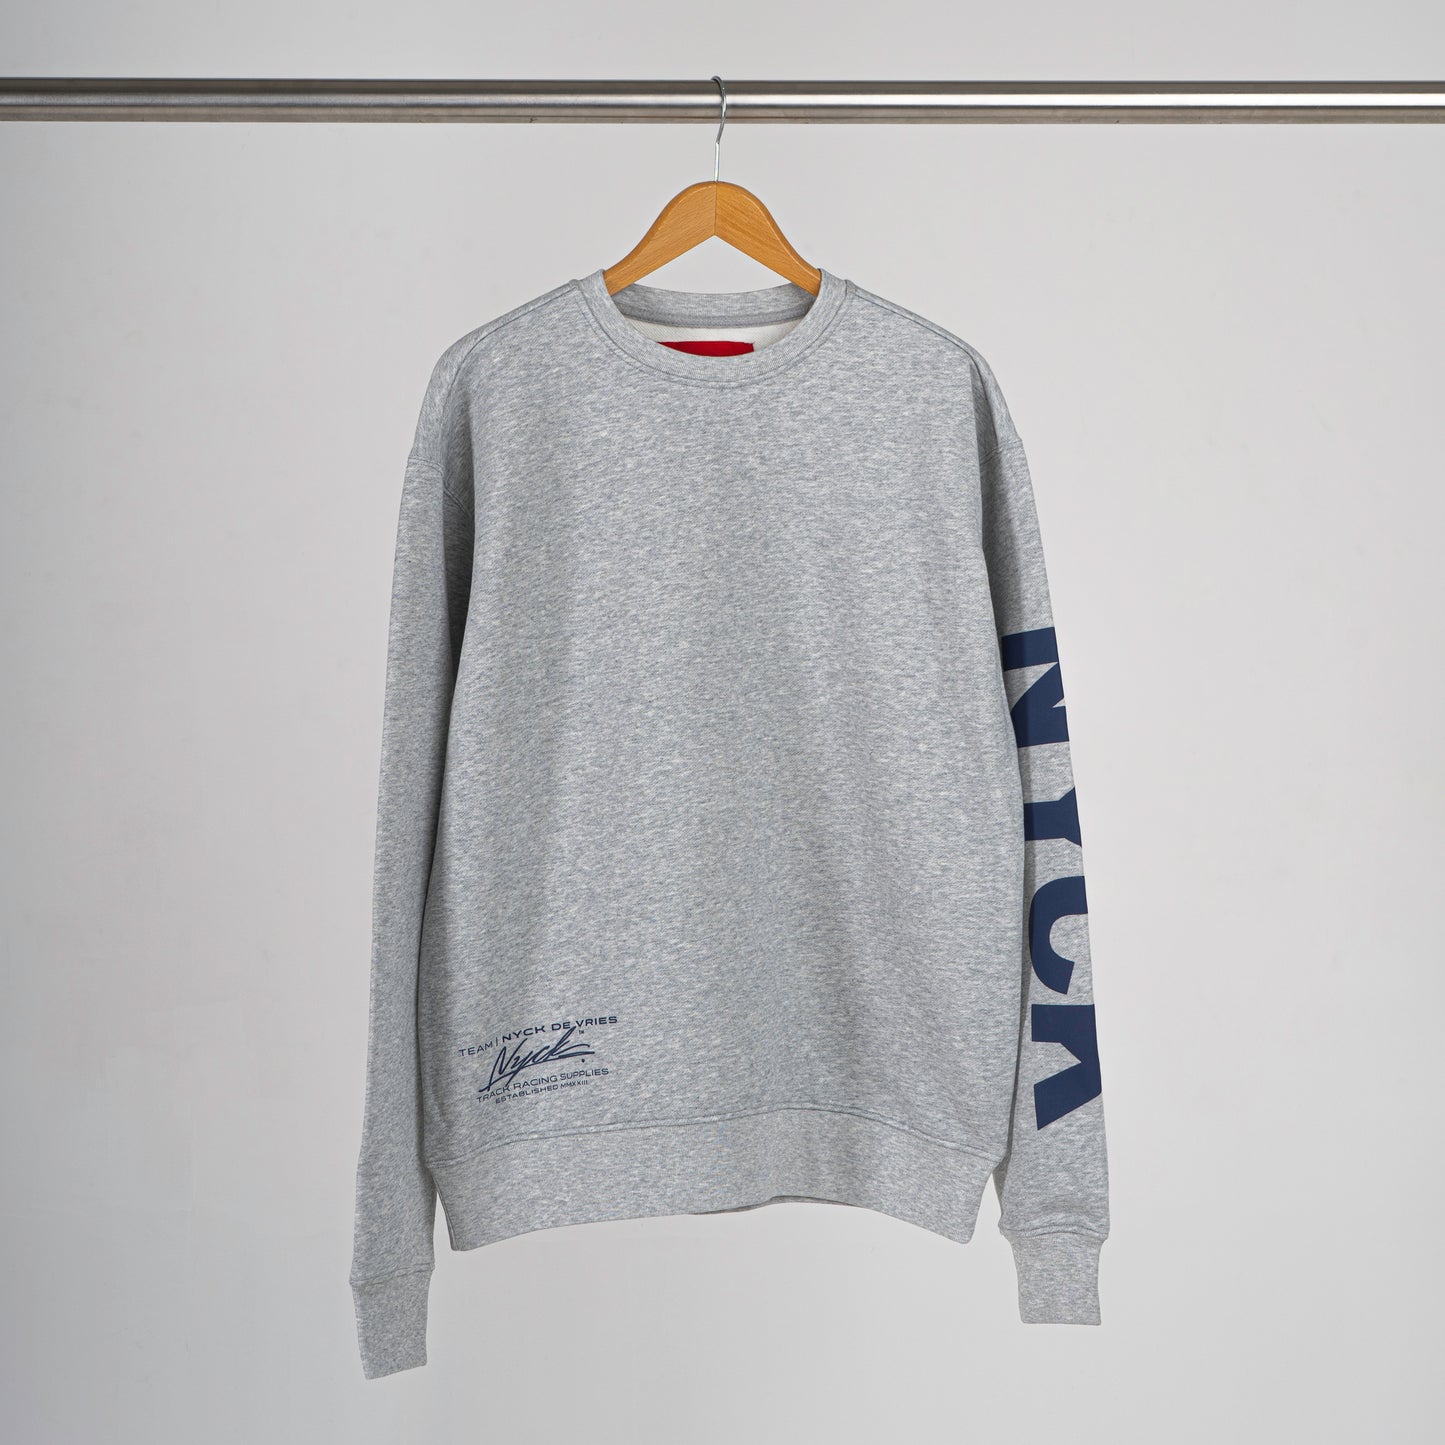 The official NYCK sweater – nyckdevries